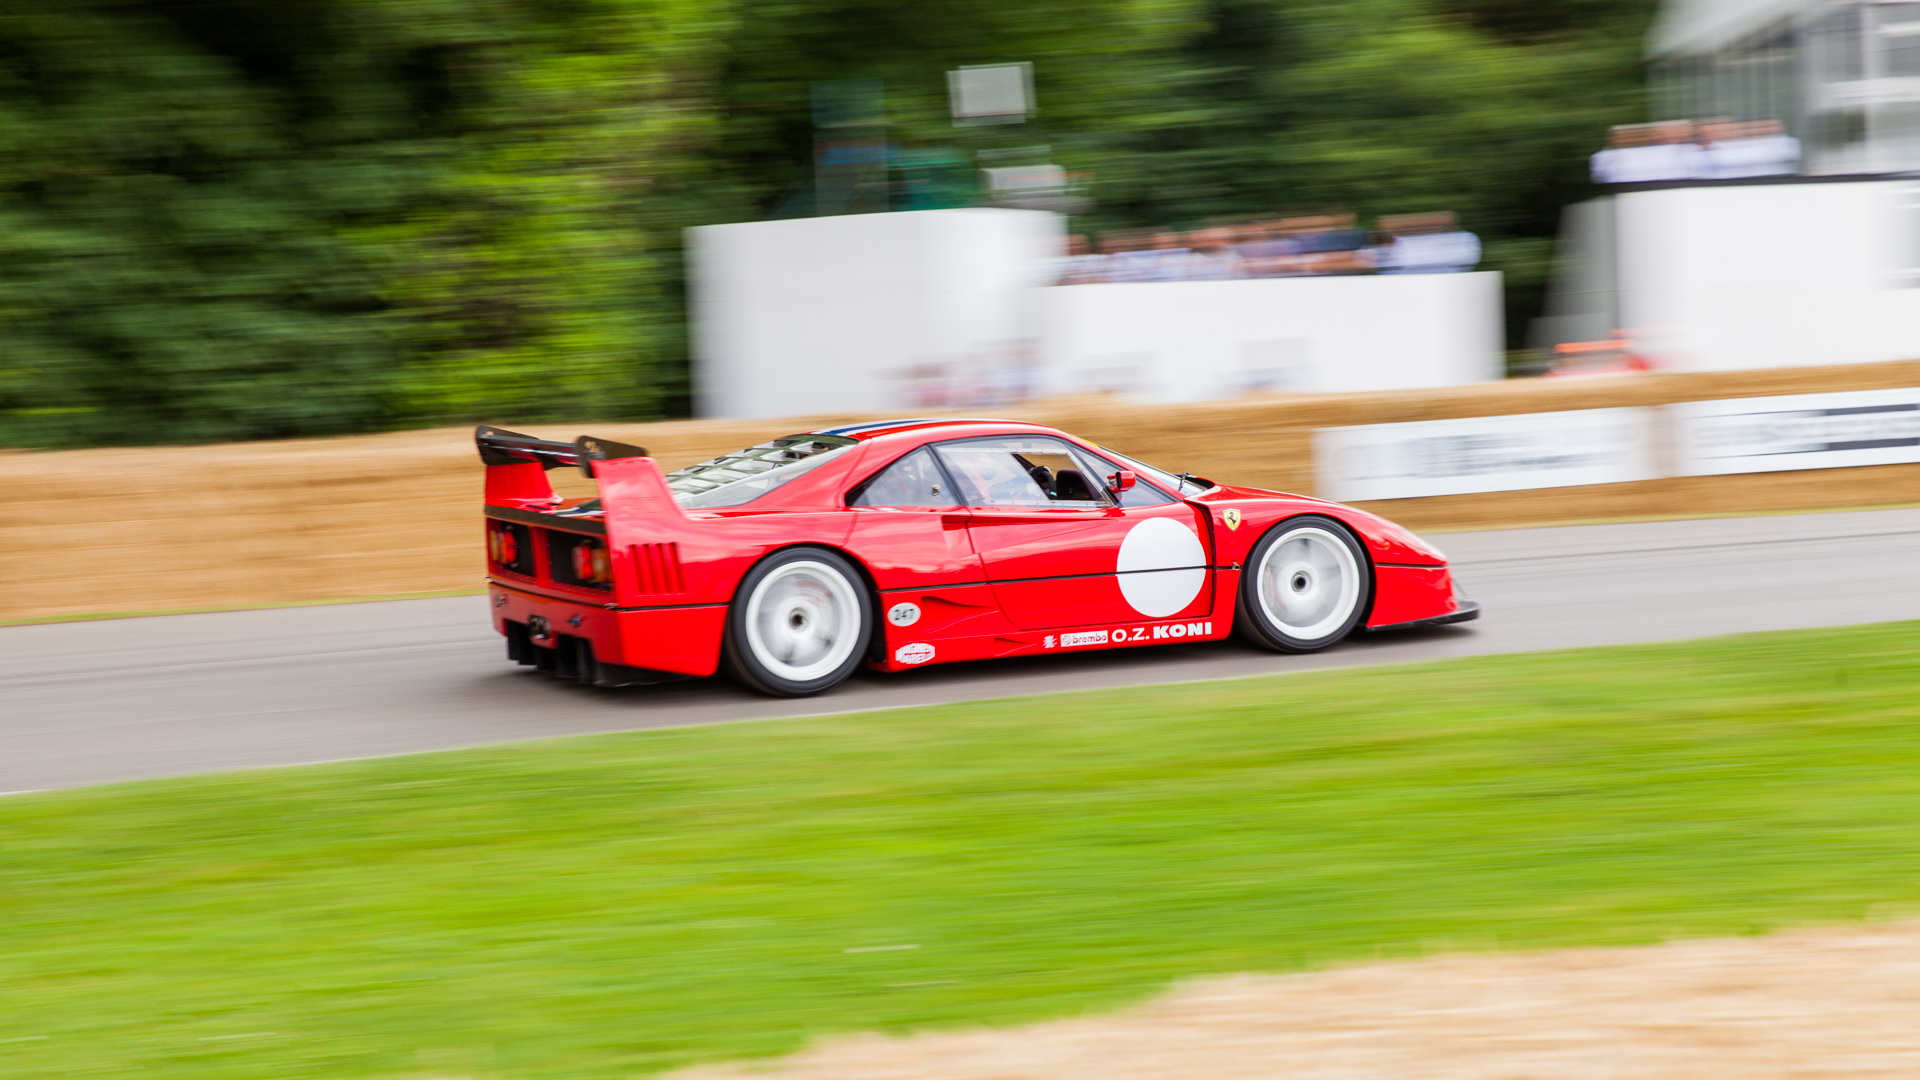 2017 Goodwood Festival of Speed-Day 2